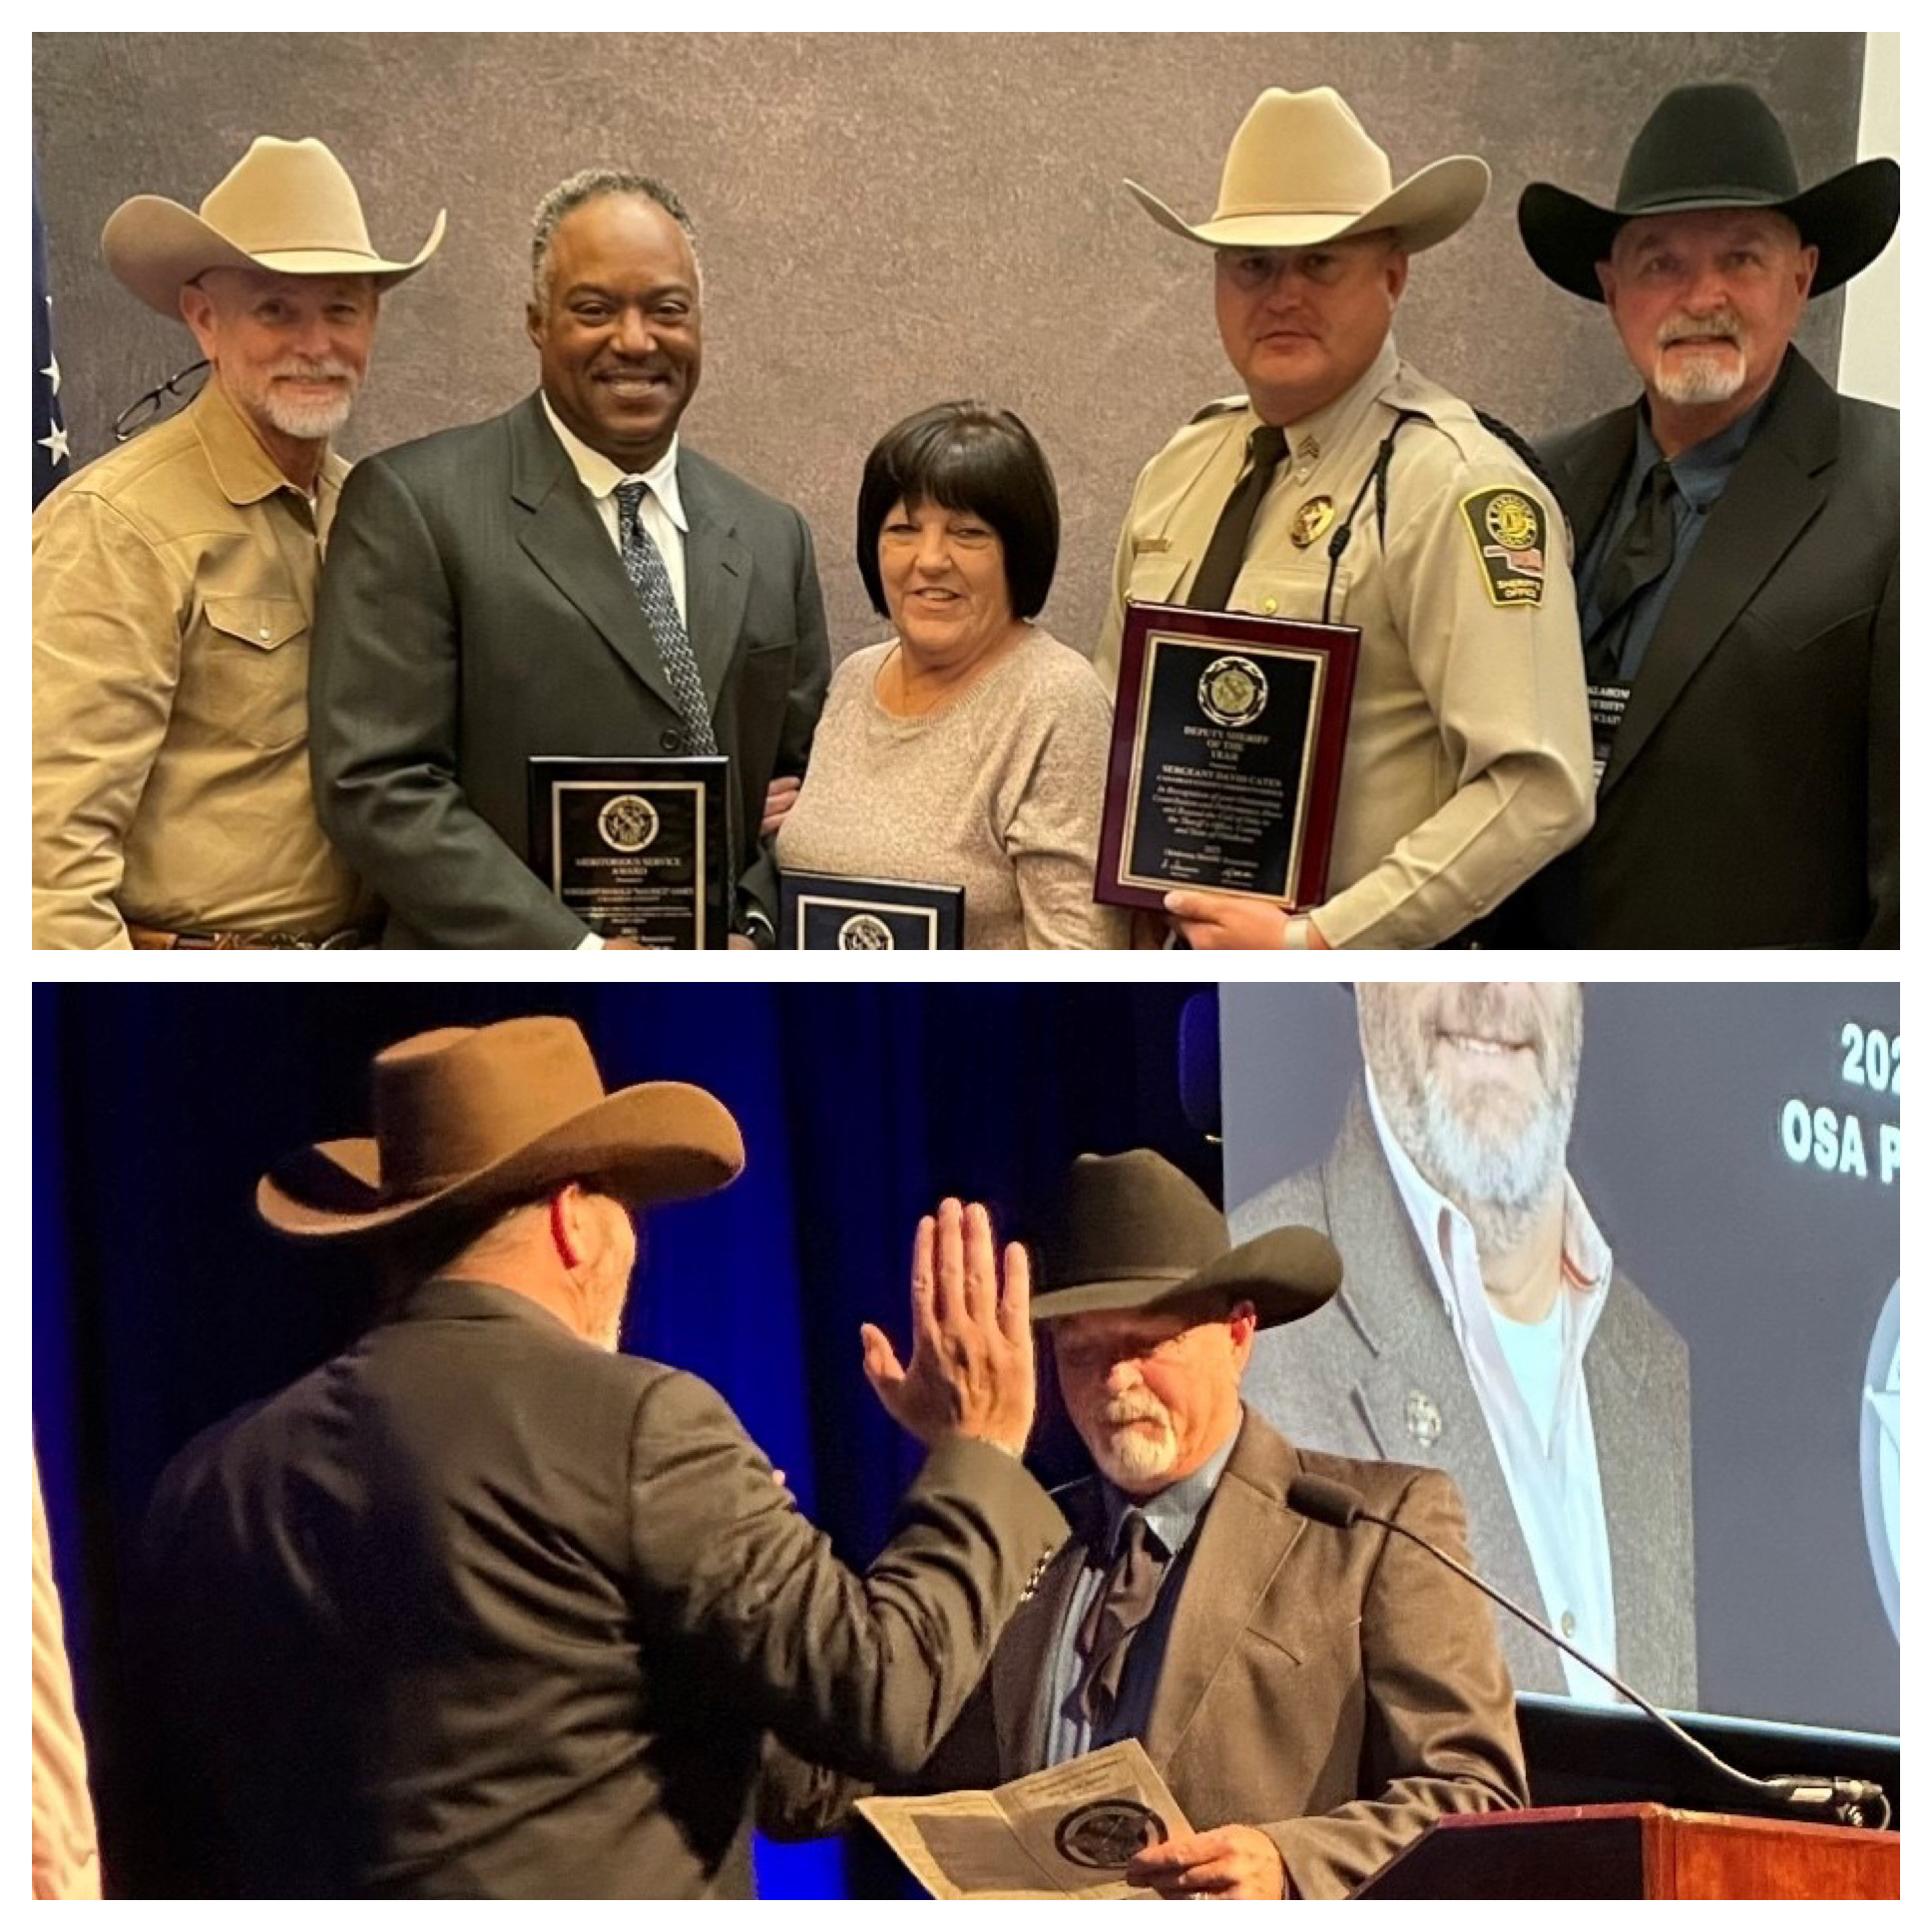 Sheriff's Office members recognized at Oklahoma Sheriffs Association Awards Banquet